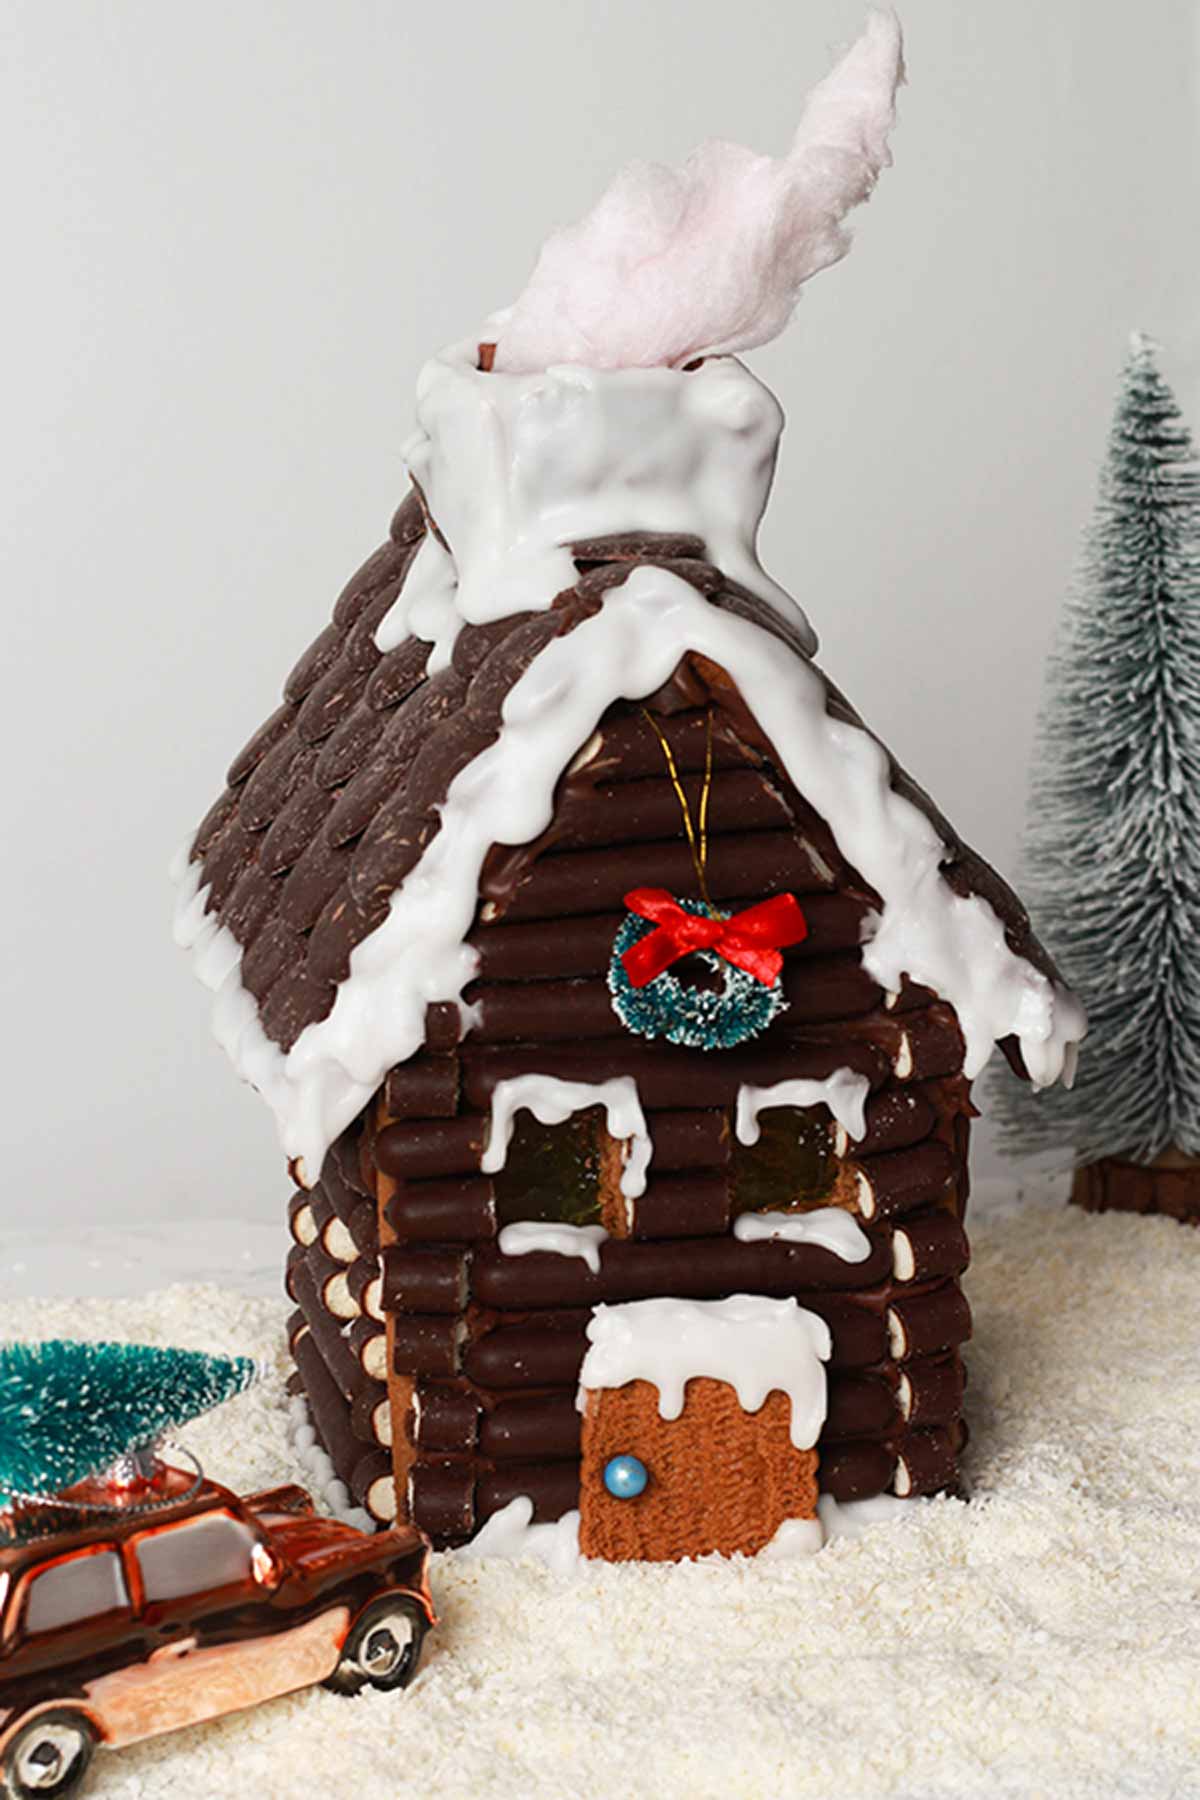 Vegan Gingerbread House with candy floss smoke coming out of the chimney